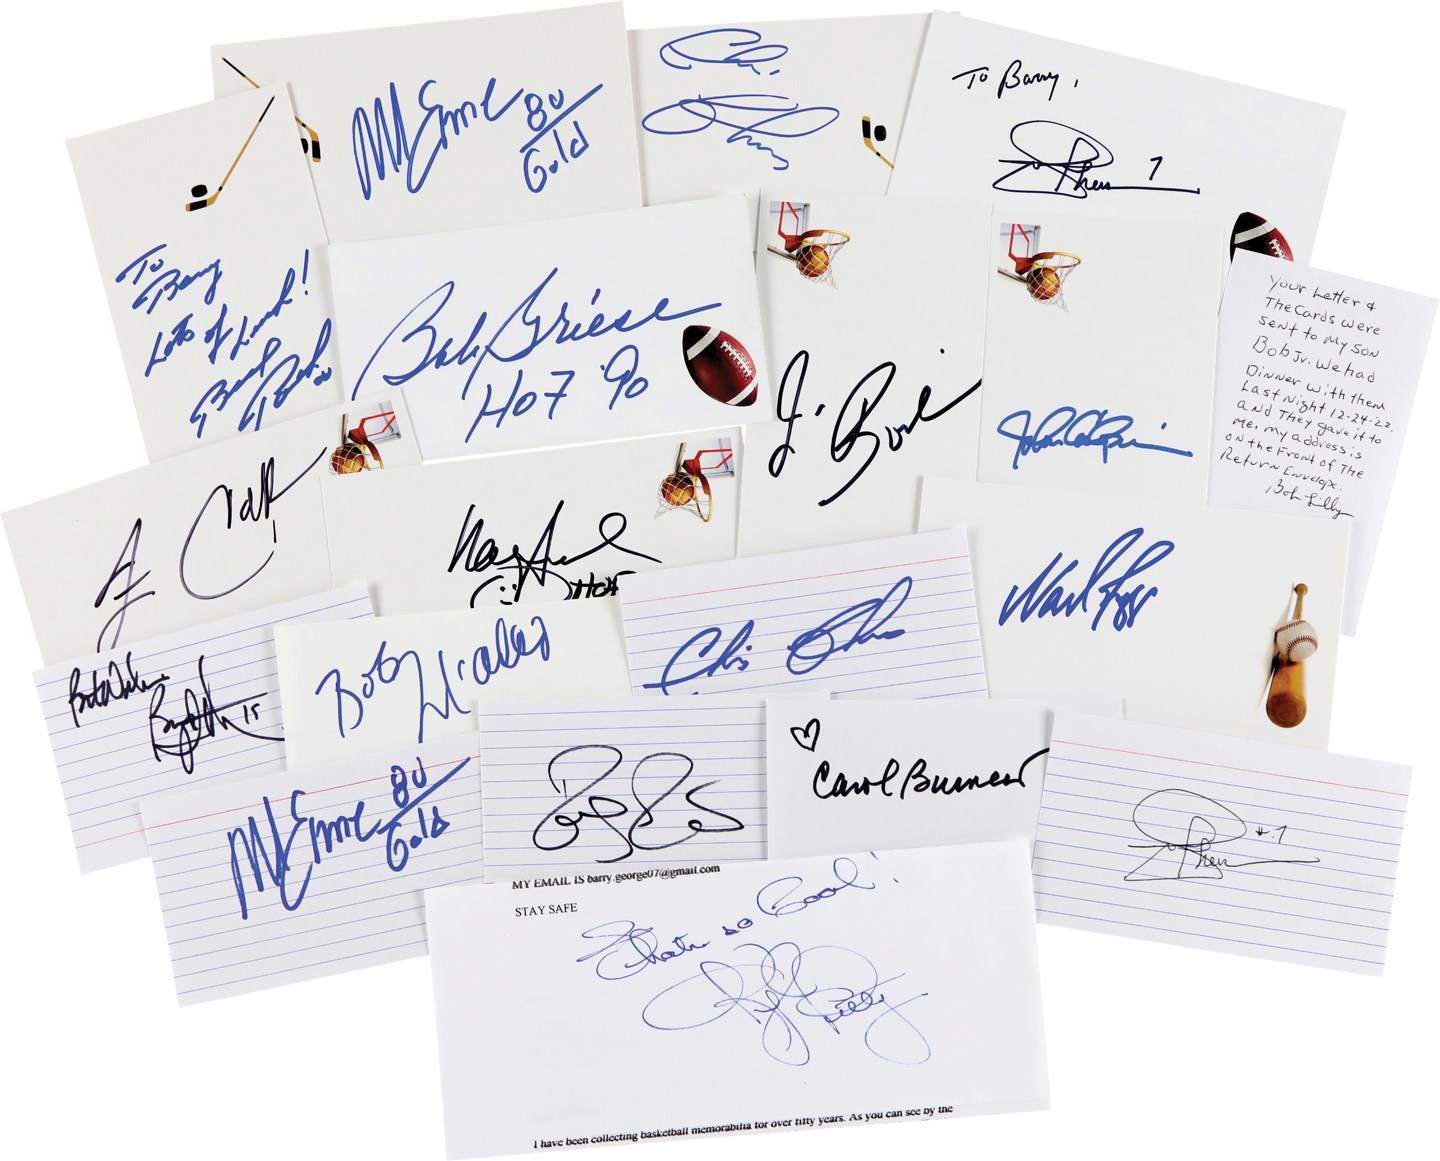 Baseball Autographs - Large Multi-Sport Autograph Archive with Hall of Famers (500+)